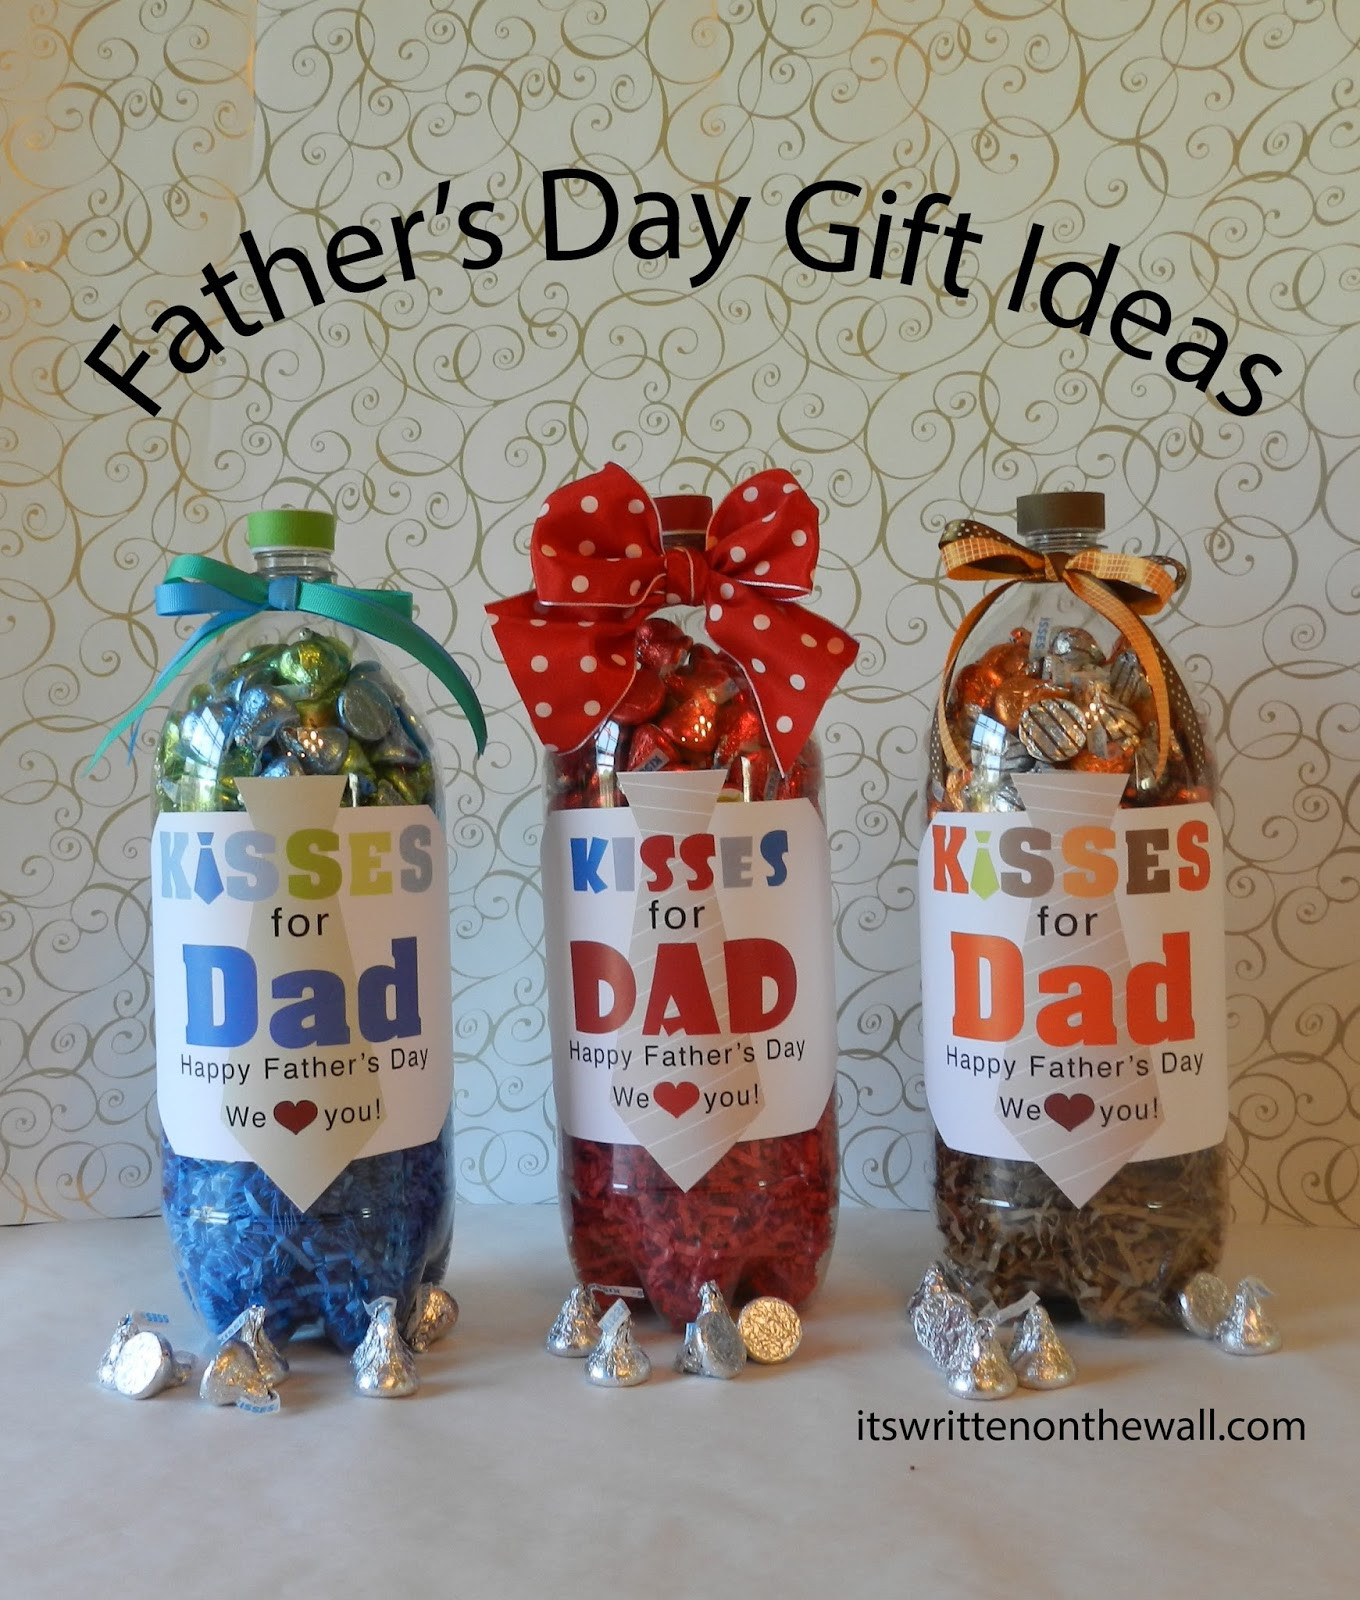 Fathers Day Gift Ideas For New Dads
 It s Written on the Wall Fathers Day Gift Ideas For the